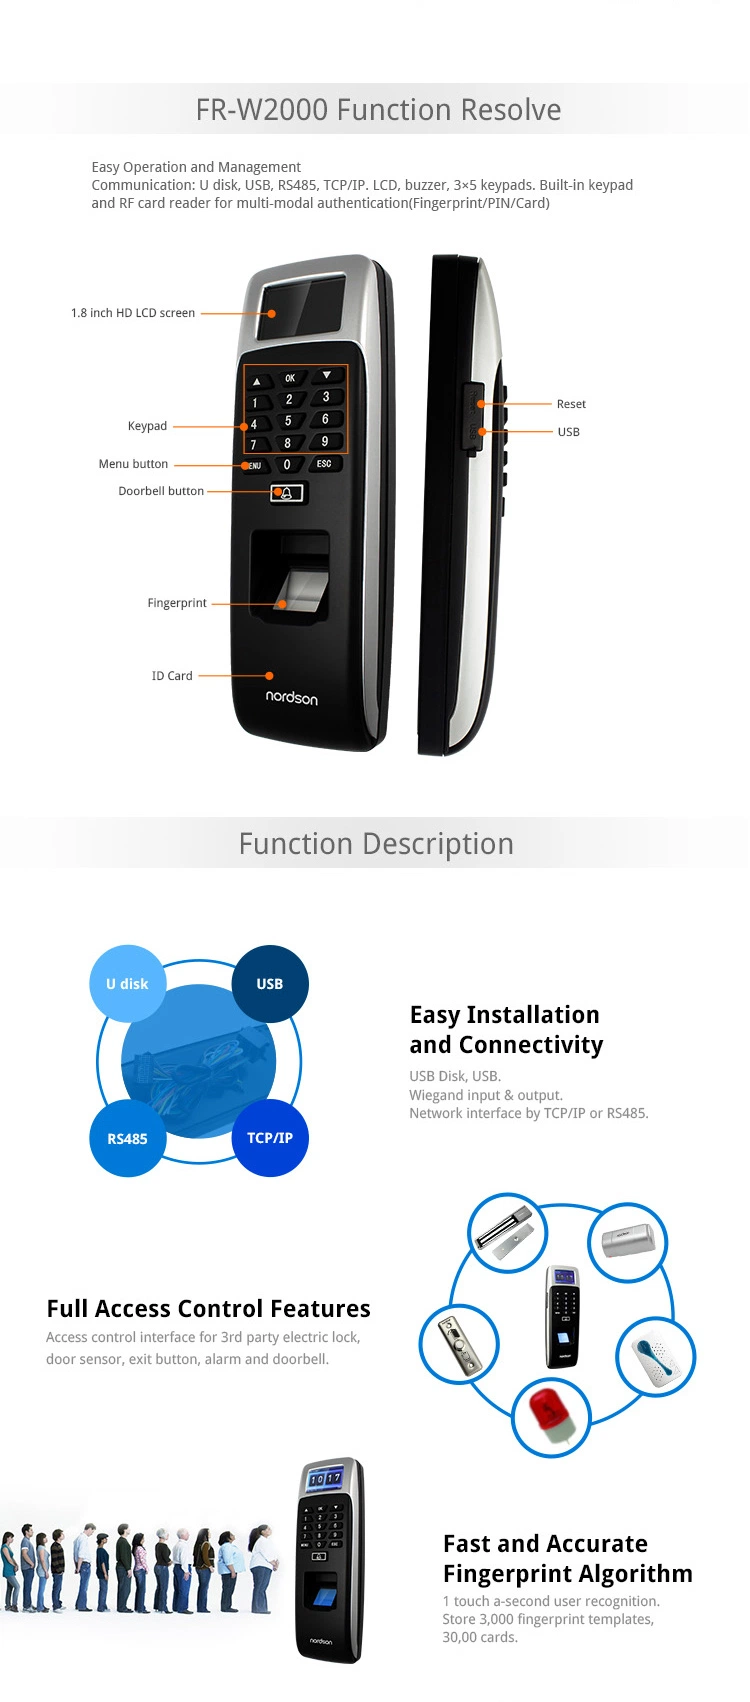 17 Languages Waterproof IP65 ID Card Biometric Network Fingerprint Reader with Access Control